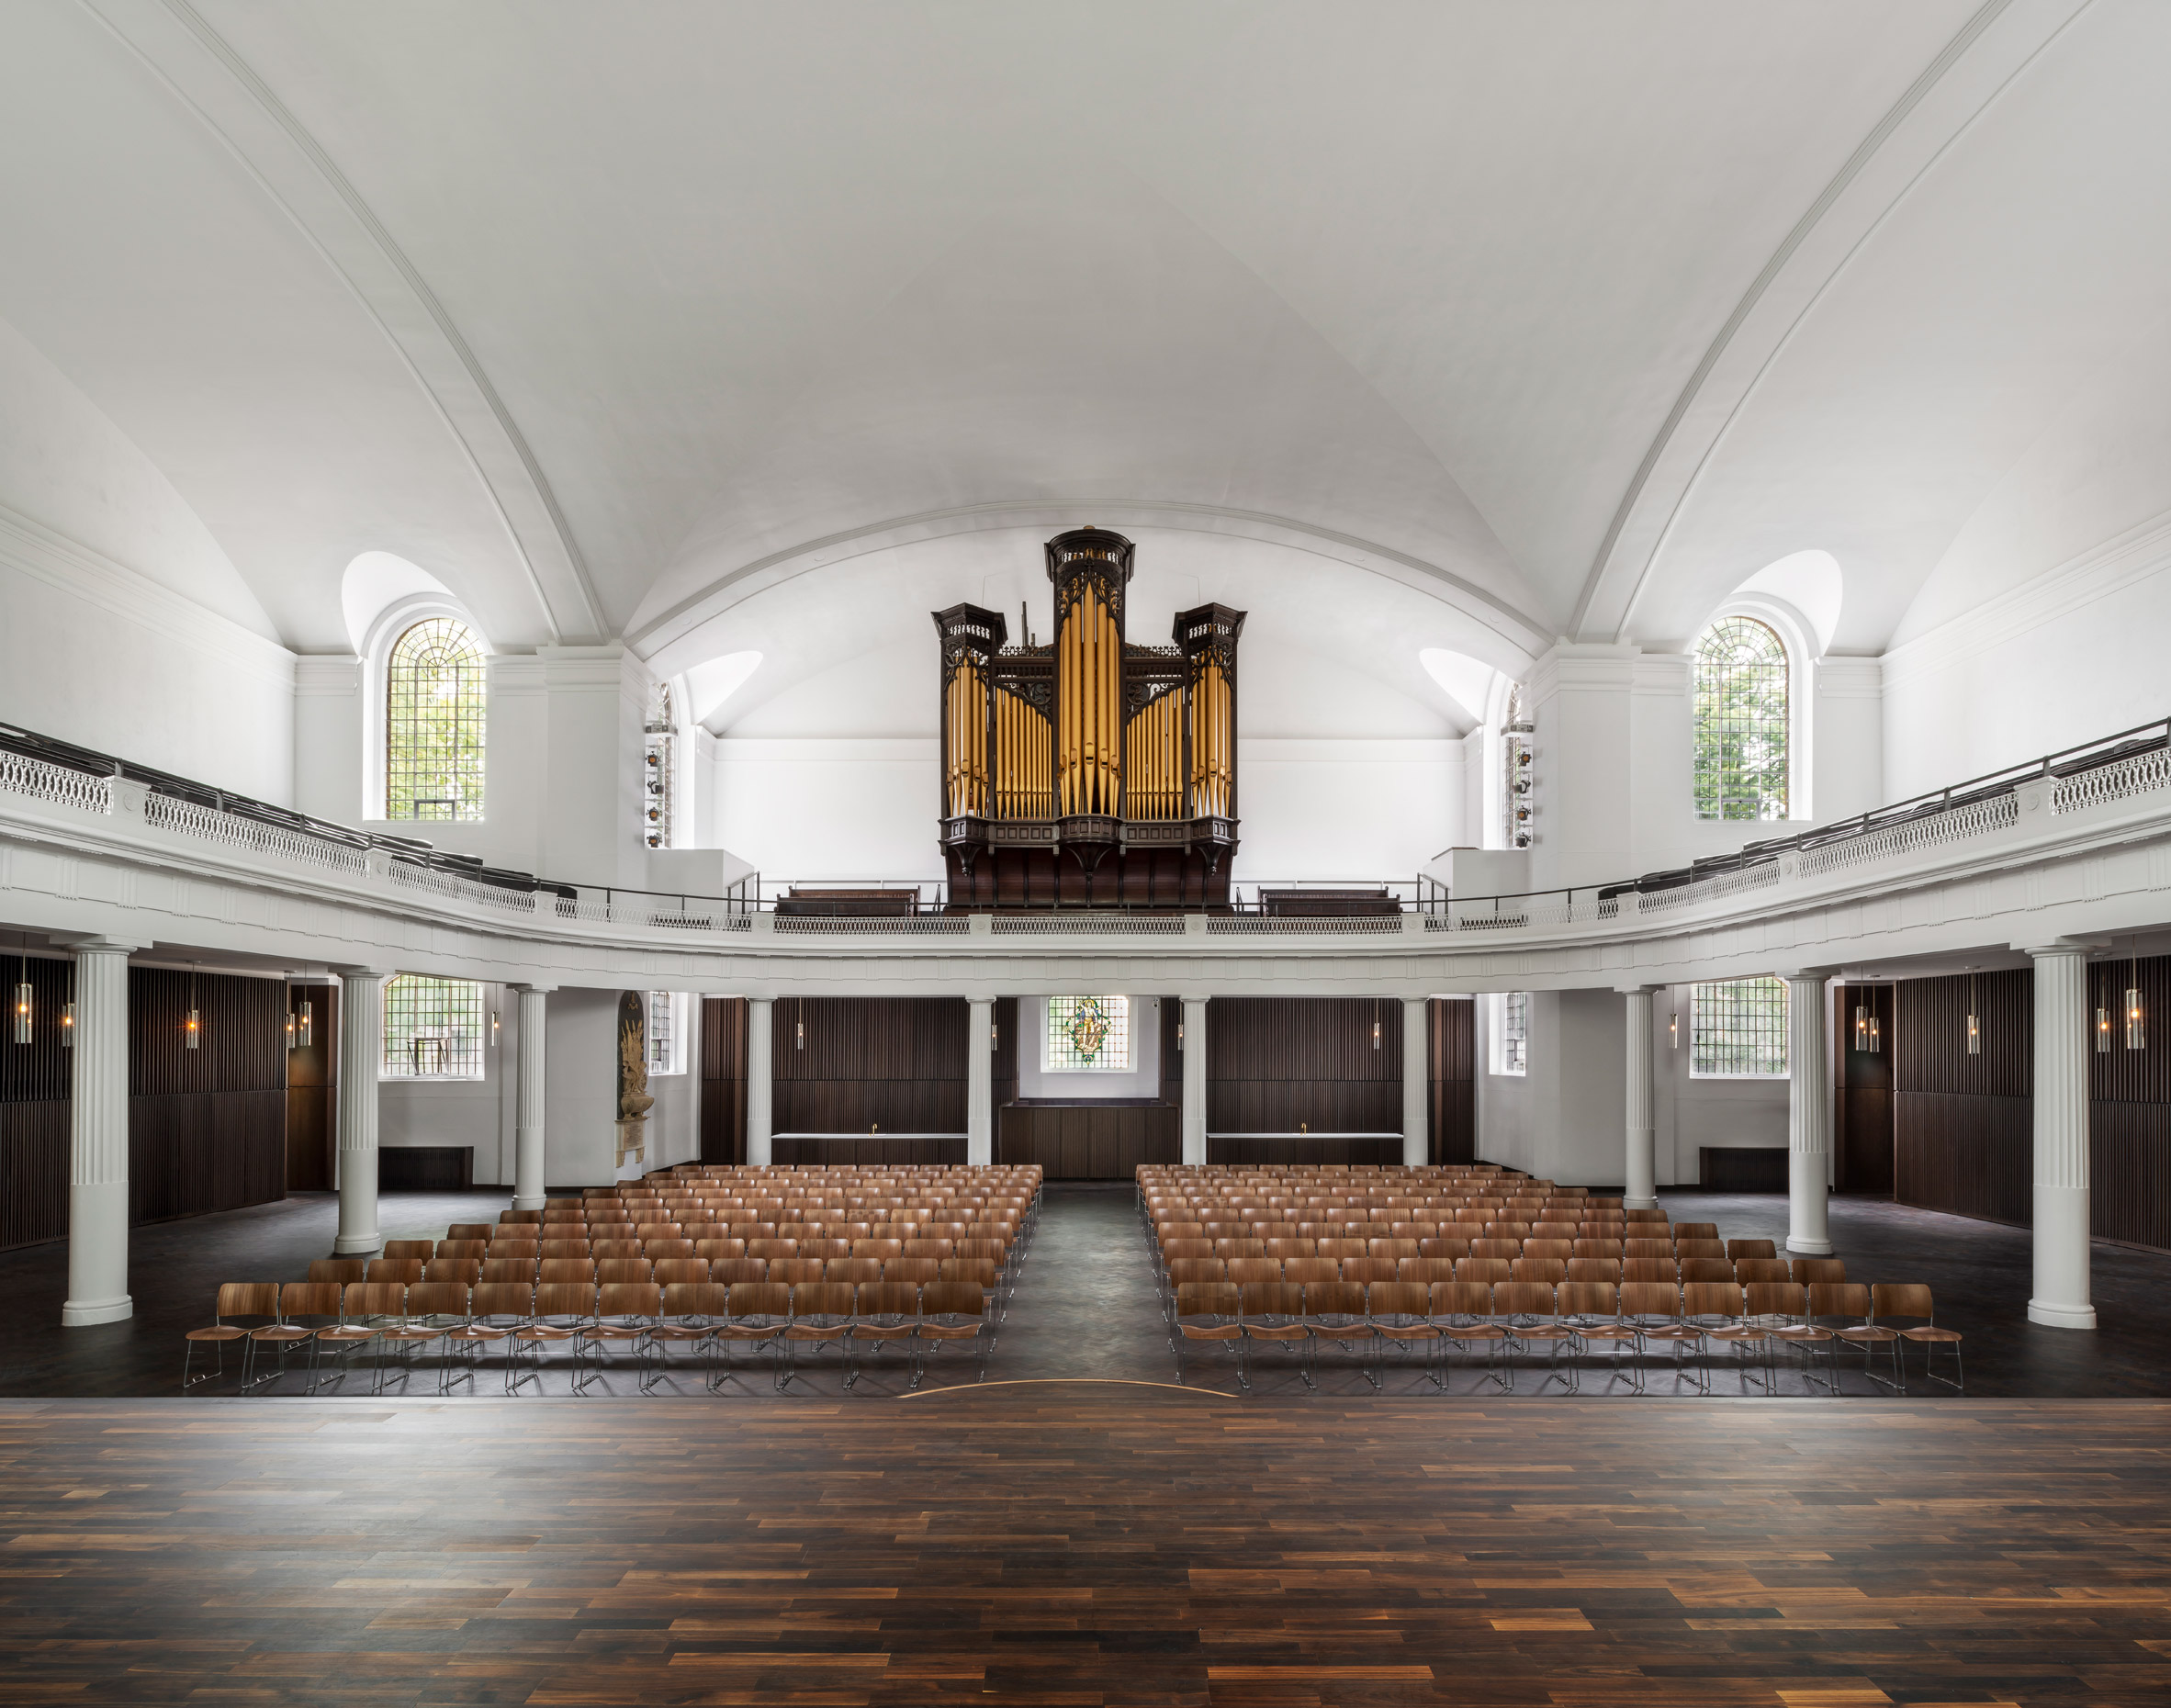 The nave of the refurbished St John at Hackney by John Pawson and Thomas Ford & Partners